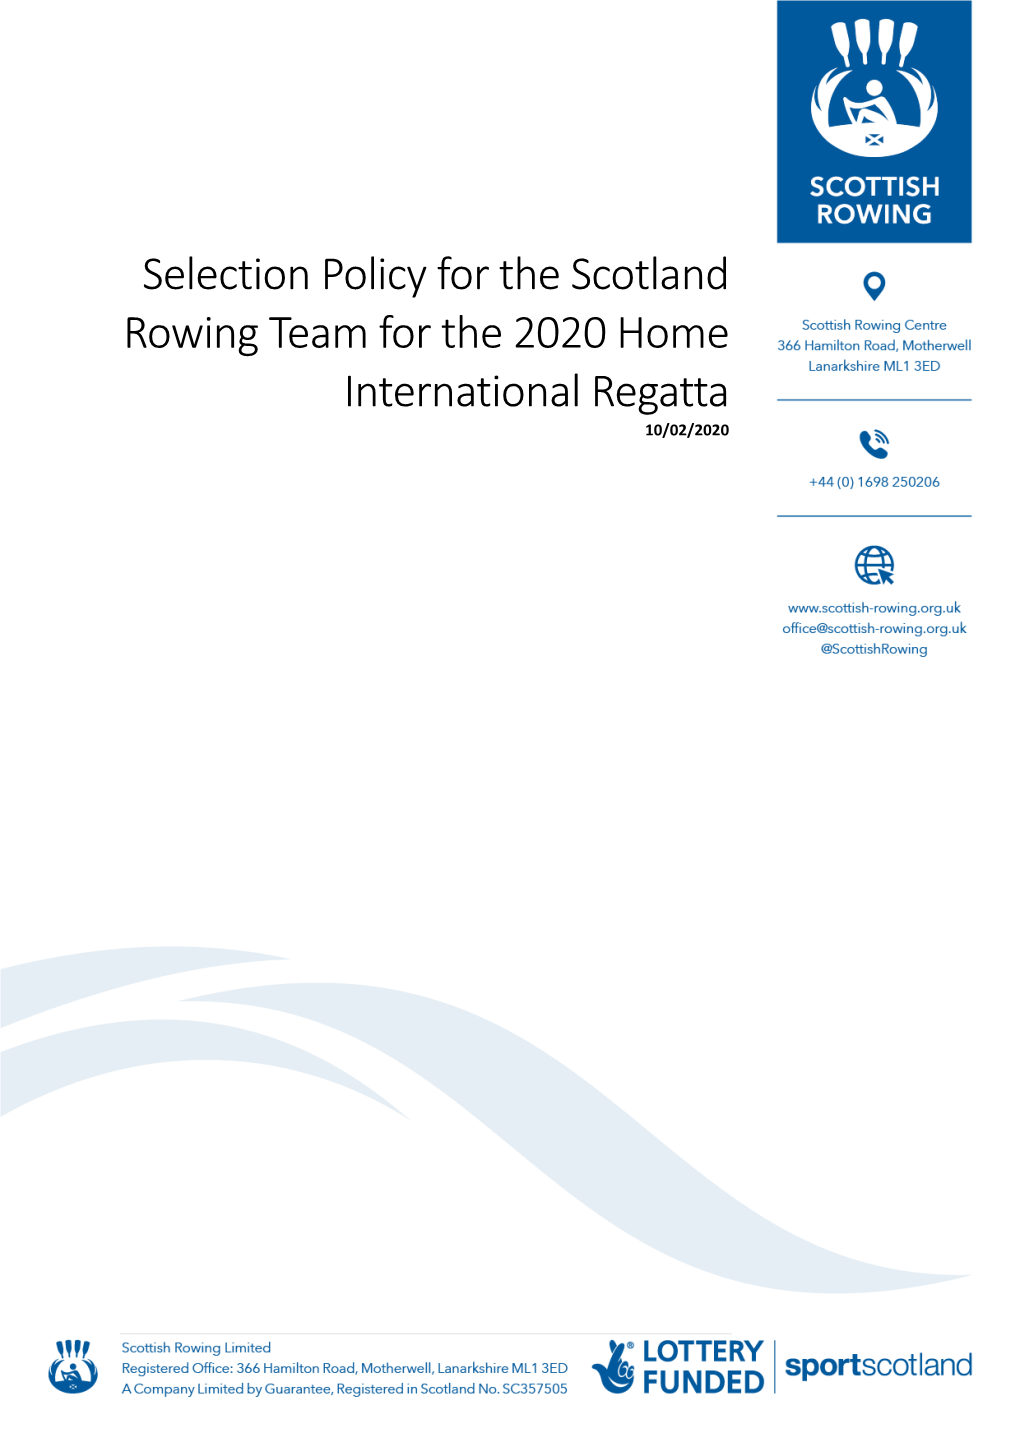 Selection Policy for the Scotland Rowing Team for the 2020 Home International Regatta 10/02/2020